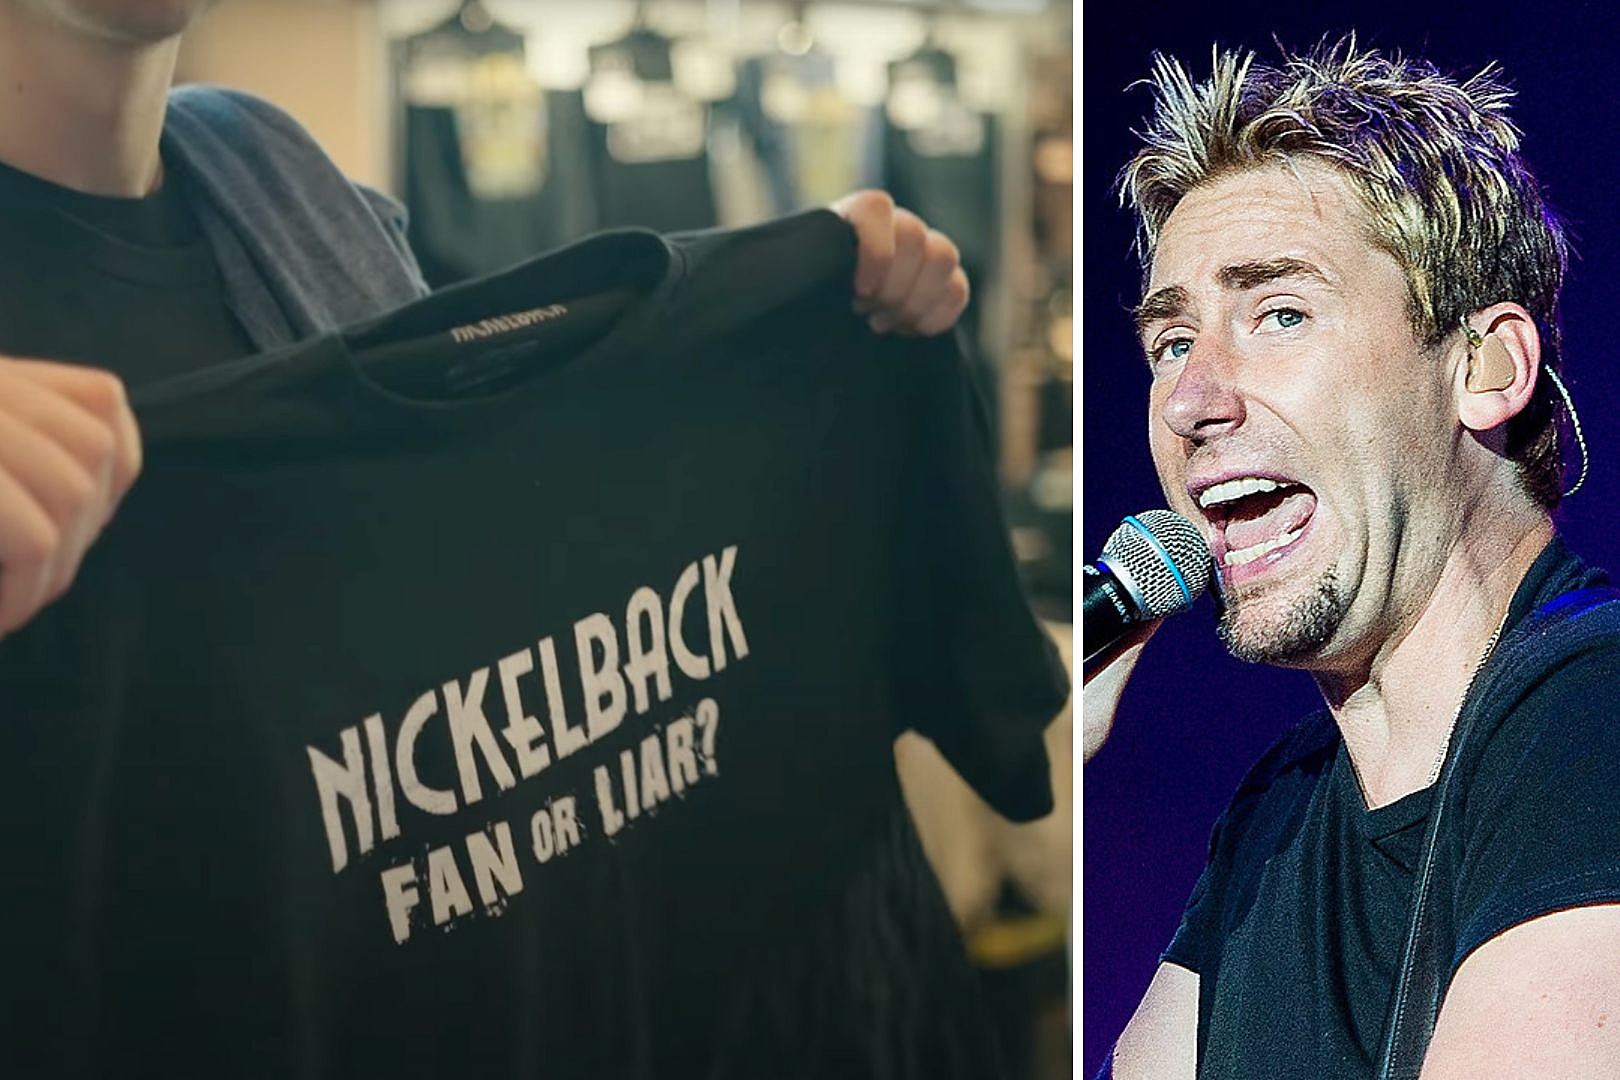 How video game fashion went from Inspired to Nickelback to worse.